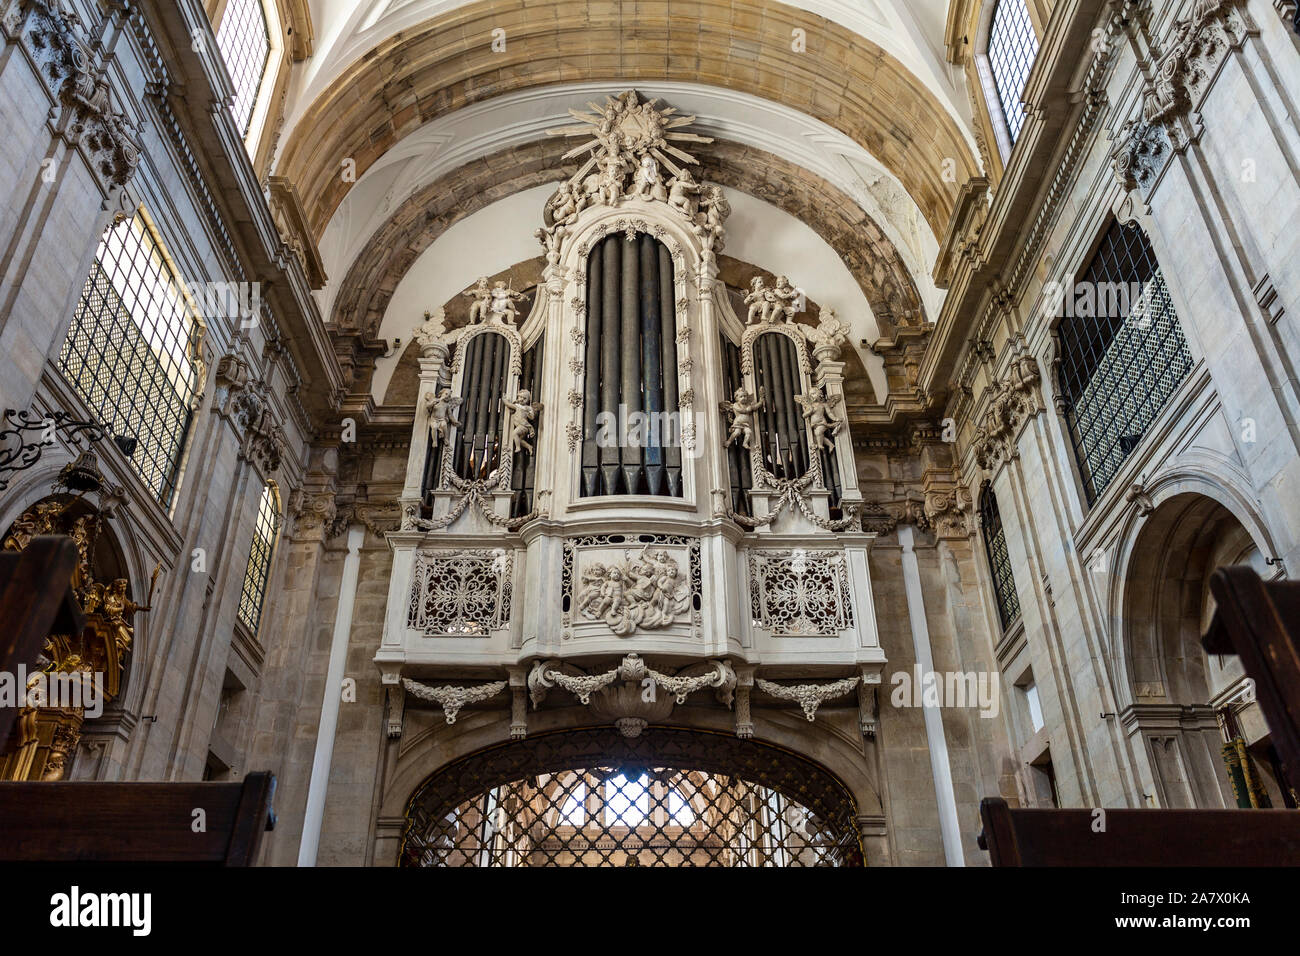 View of the church side of the dual face Baroque organ built in the 18th century in the Church of the Monastery of Saint Mary of Lorvao, Coimbra, Port Stock Photo